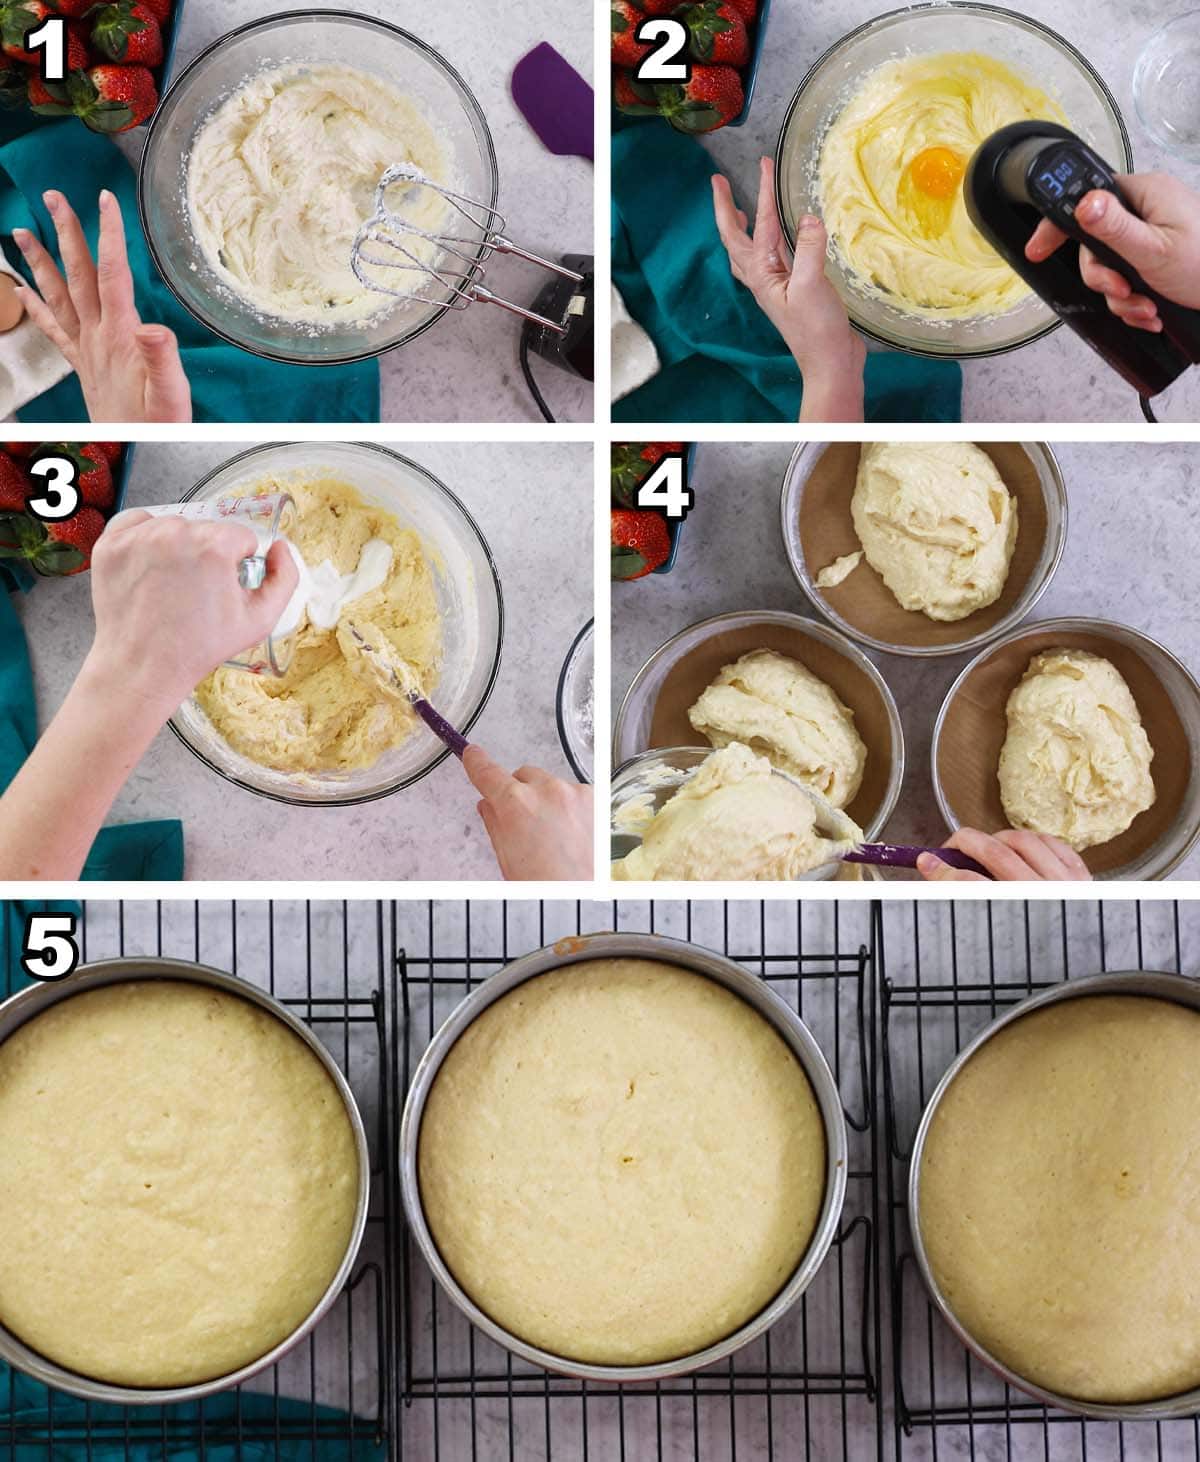 Five photos showing vanilla cake layers being prepared.